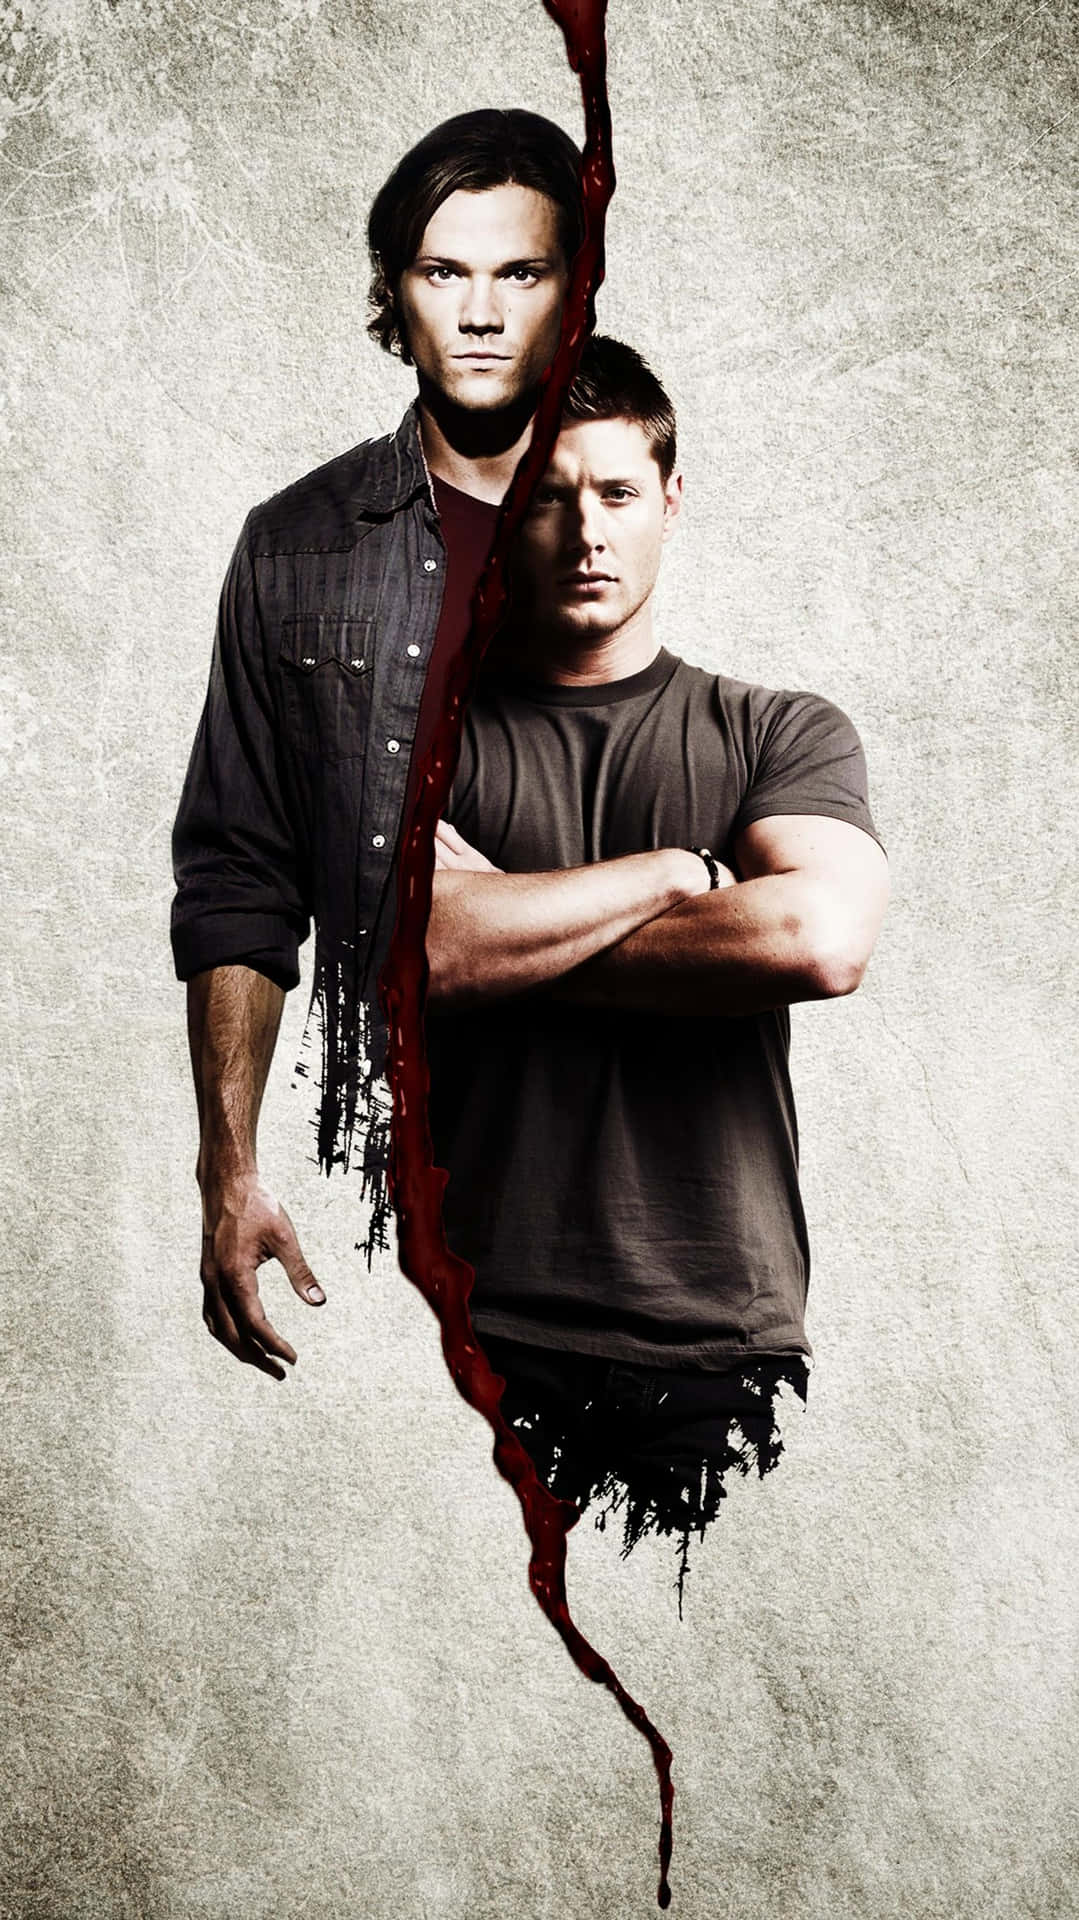 The Winchester brothers defend humanity against the supernatural